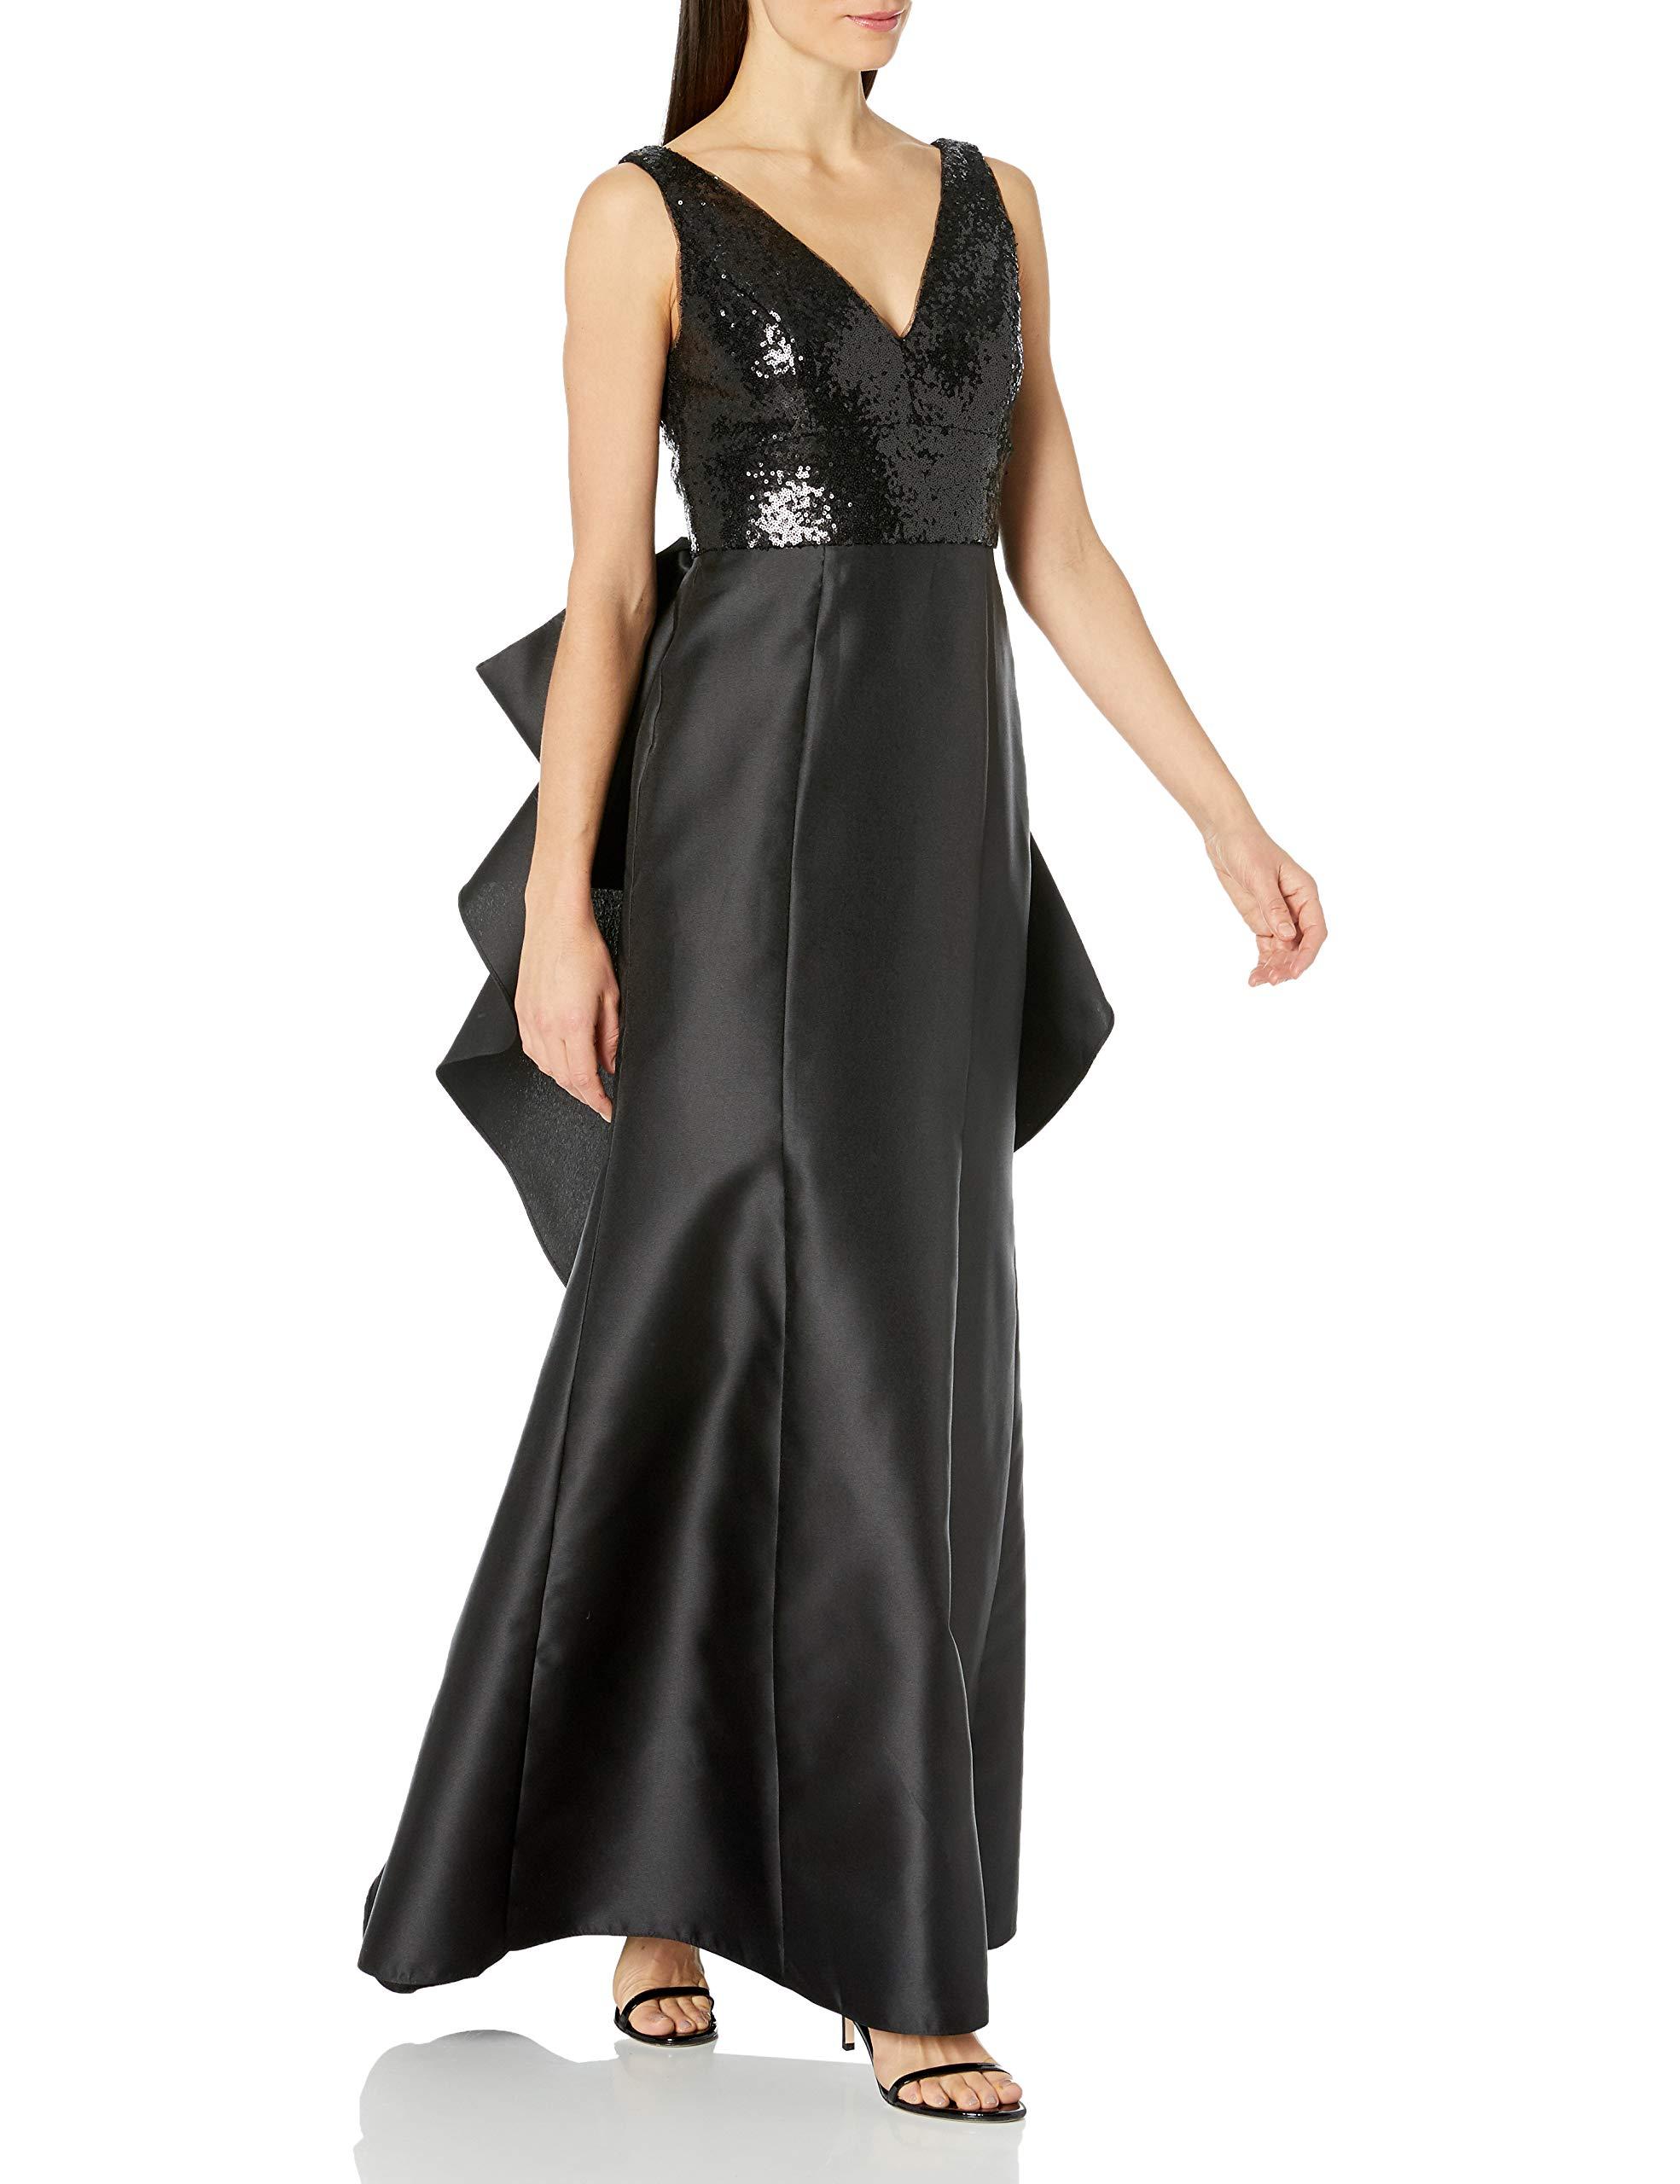 Adrianna Papell Sequin Mikado Gown in Black - Lyst